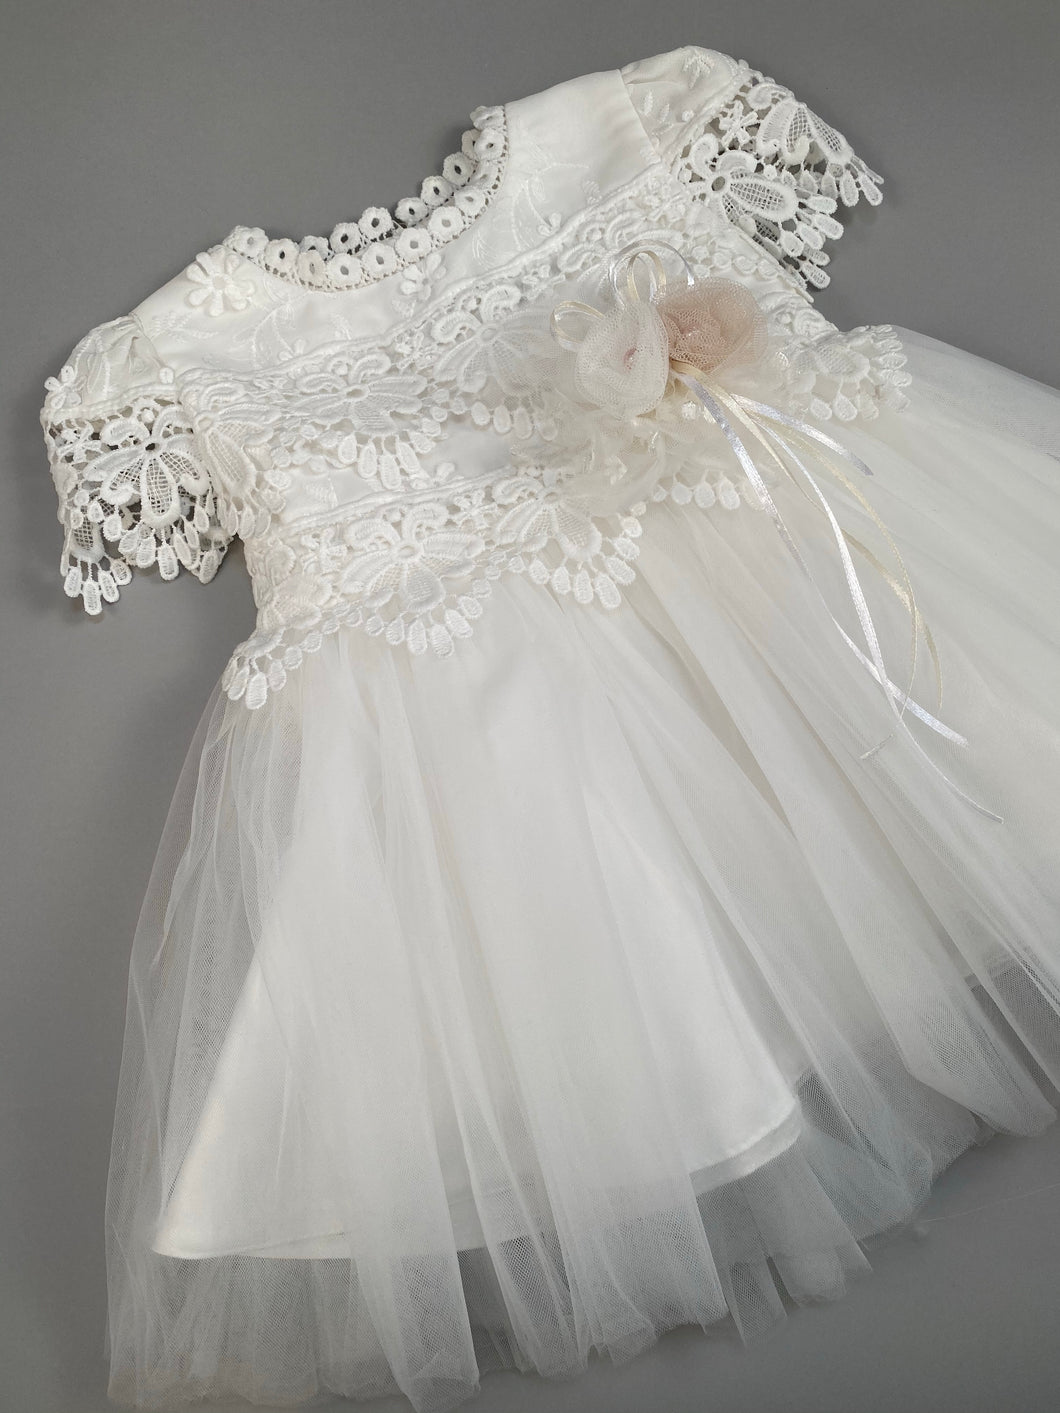 Dress 6 Girls Christening Baptismal Lace Dress with Flowers and Pearls